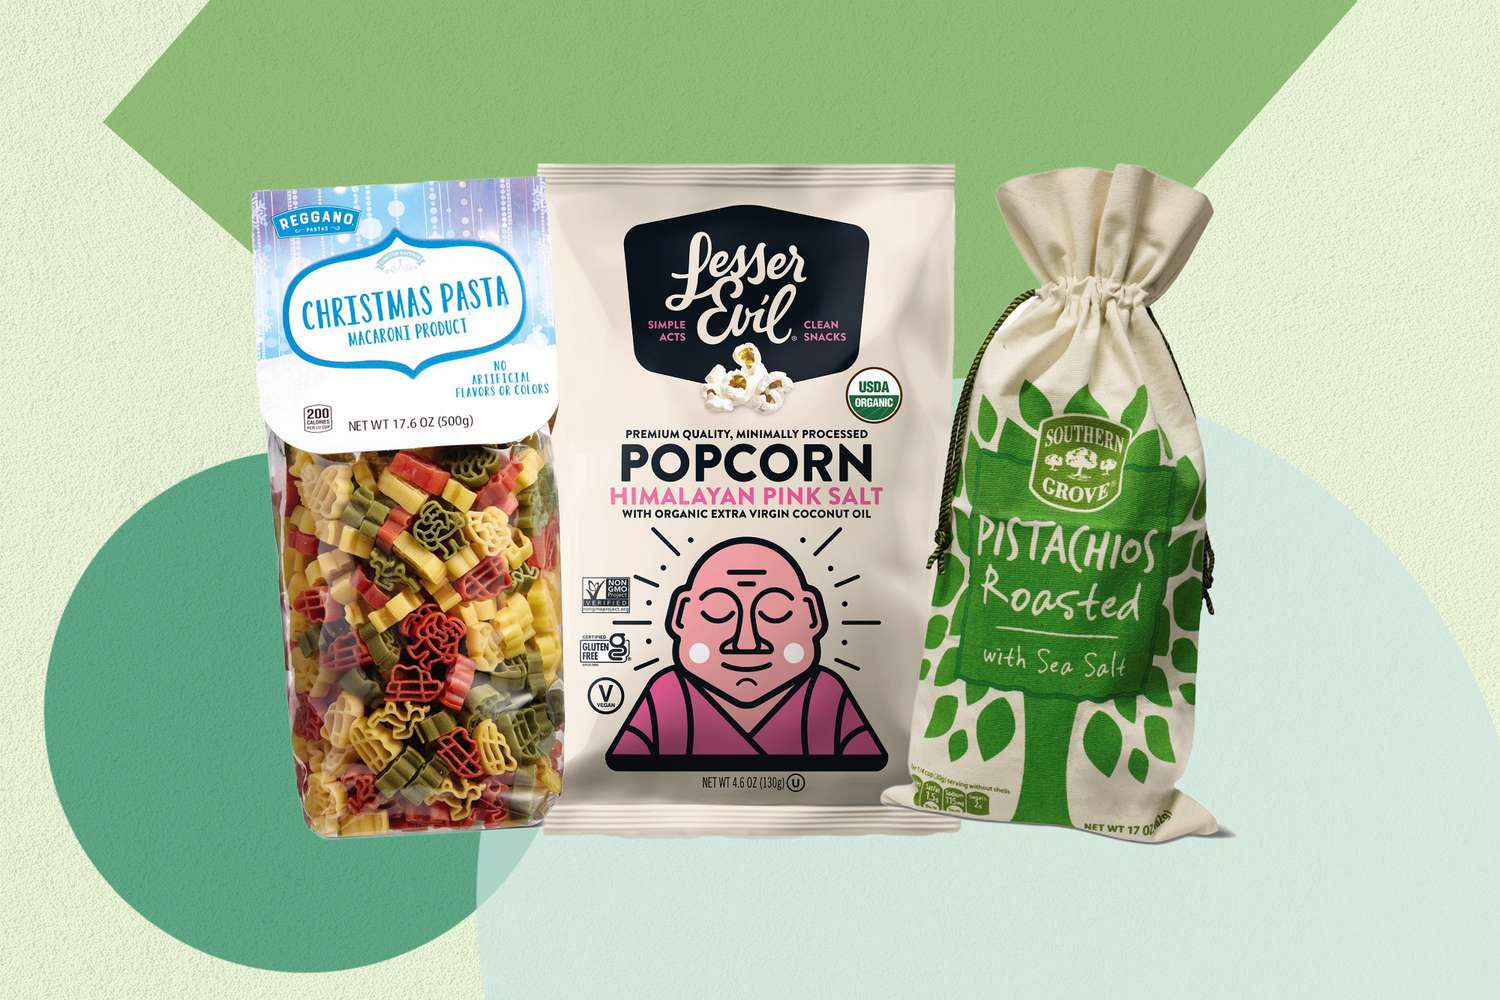 a collage of Aldi's incoming products including the Christmas pasta, Lesser Evil's Himalayan Pink Salt Popcorn, and Pistachios